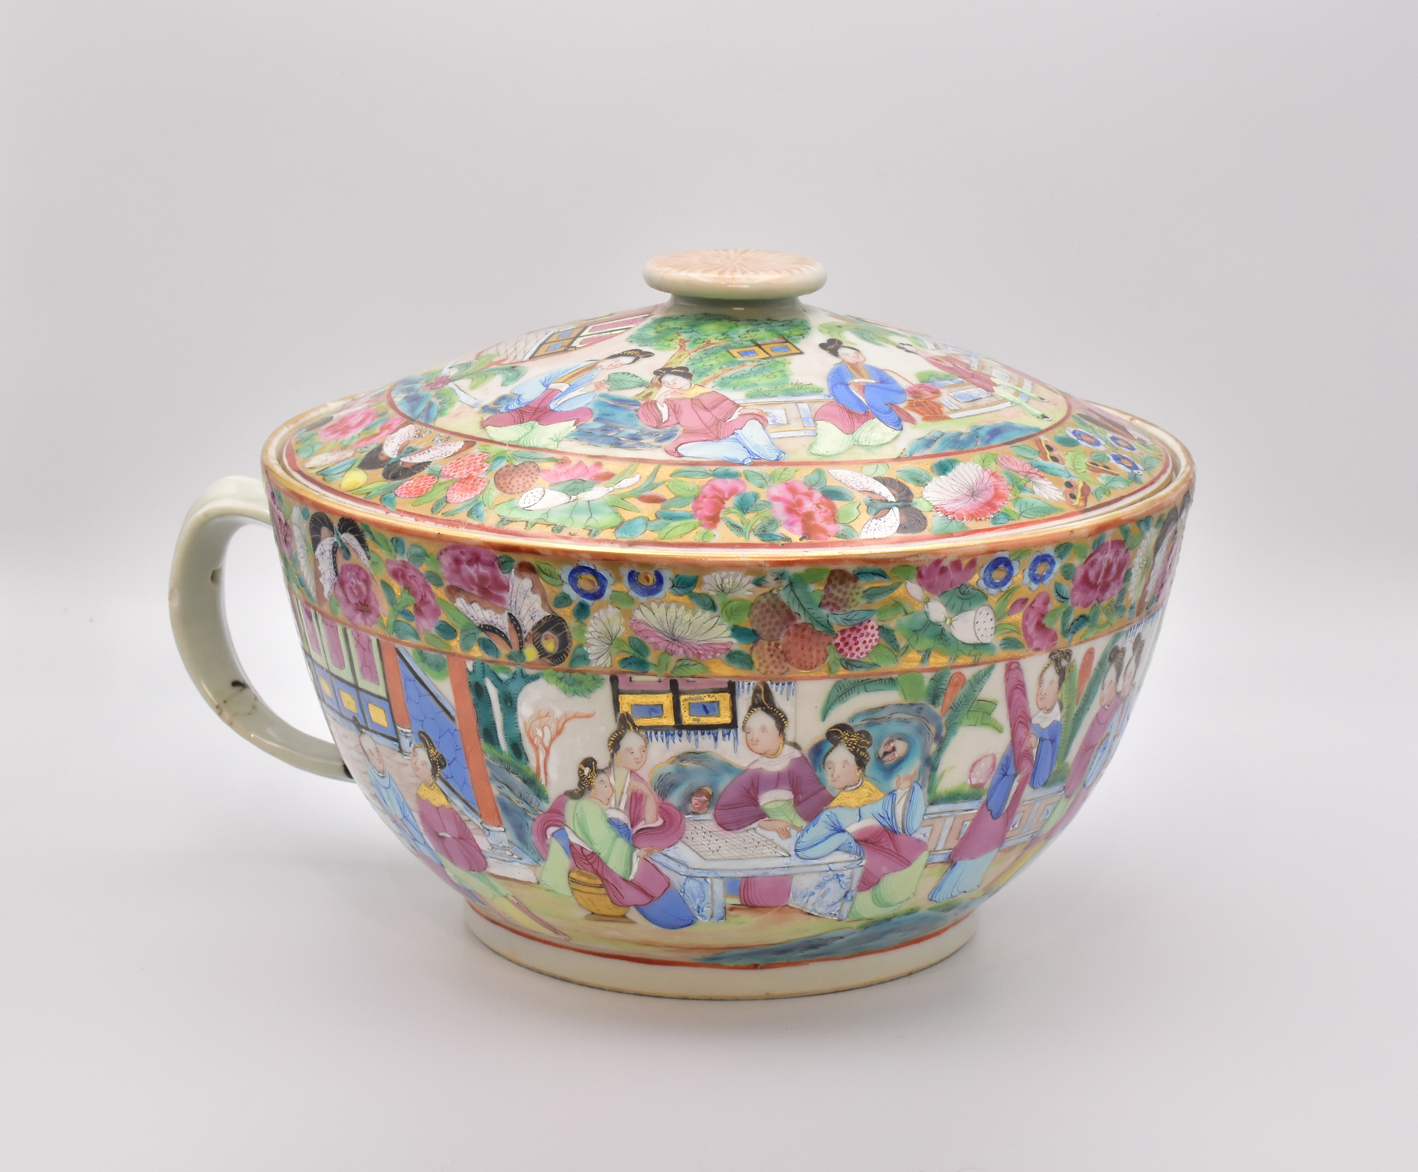 A RARE CHINESE 'FAMILLE-ROSE' PORCELAIN CHAMBER POT, QING DYNASTY, CIRCA 1810